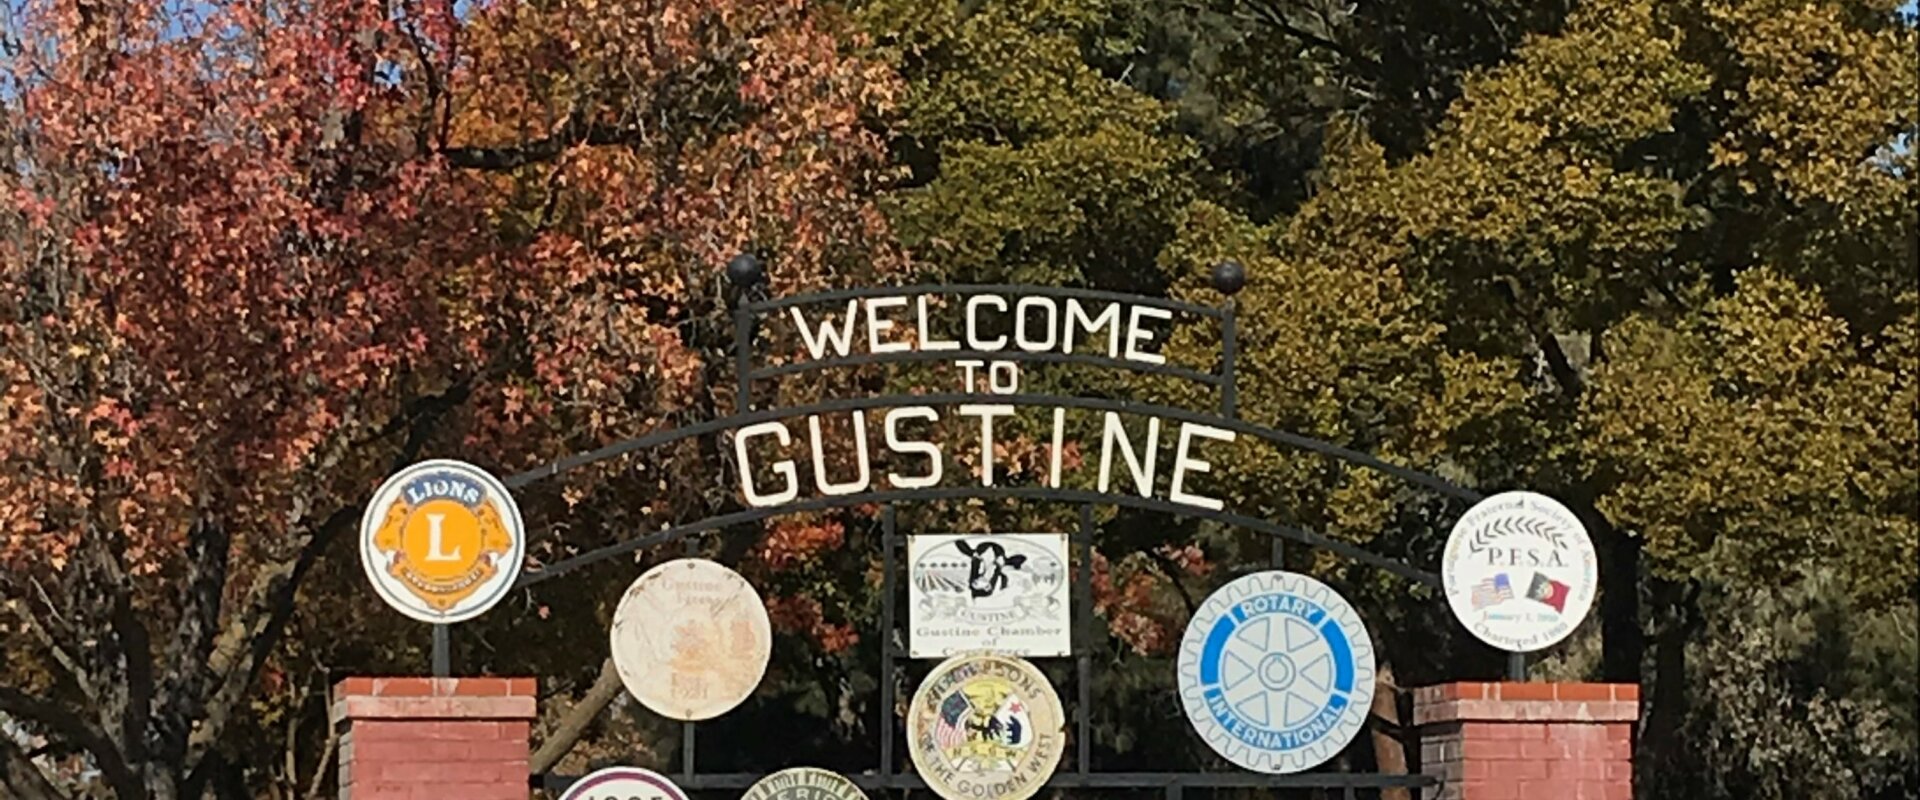 Gustine California welcome sign